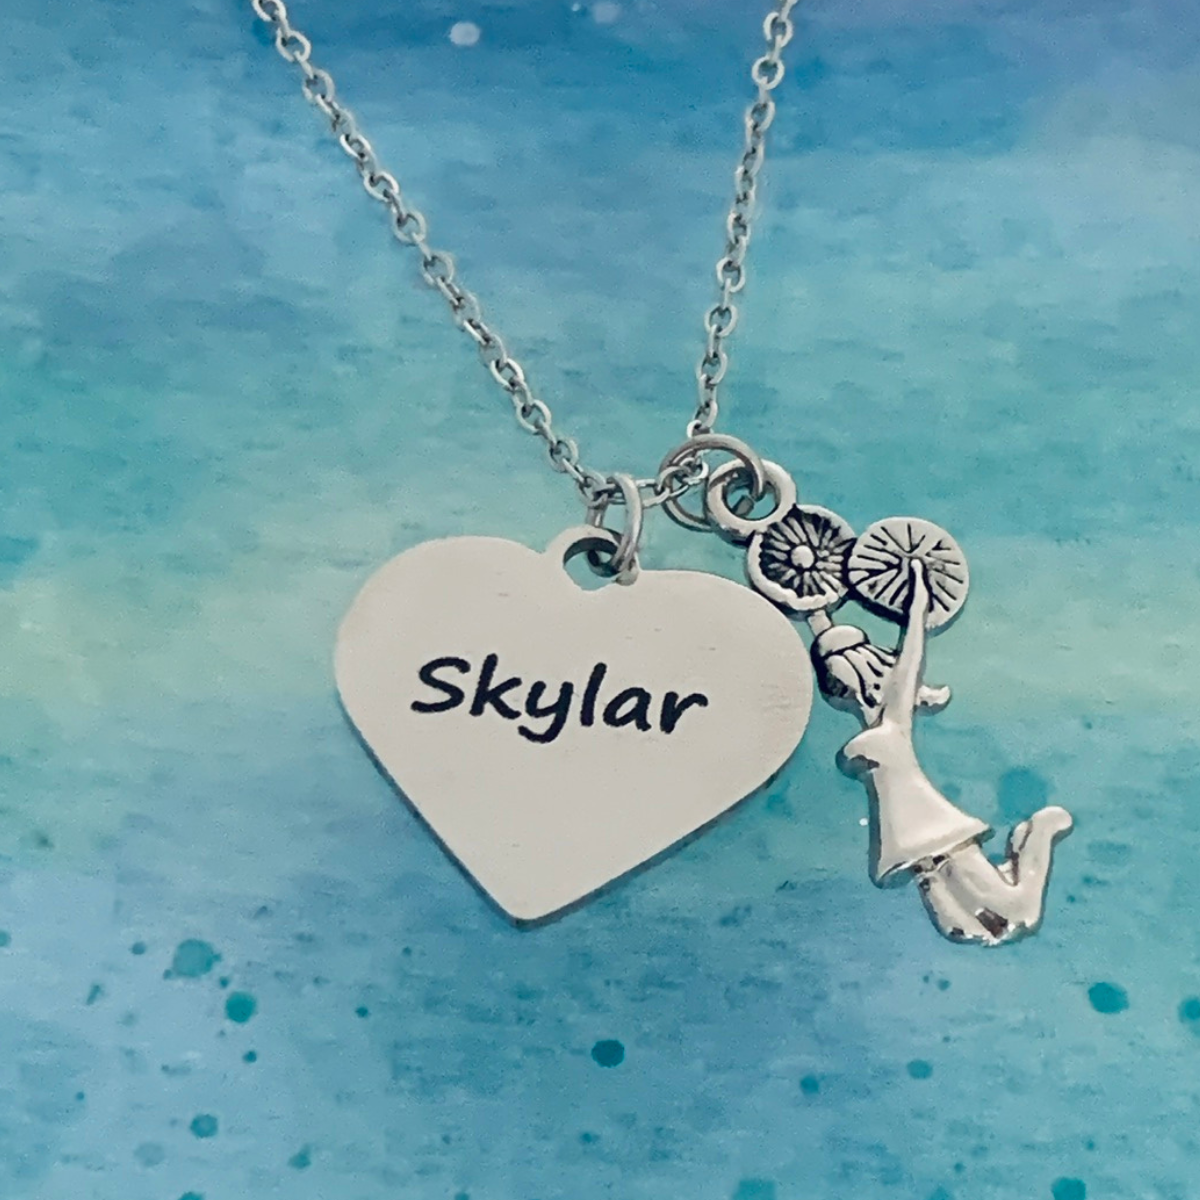 Personalized Engraved Cheer Heart Necklace-Pick Style